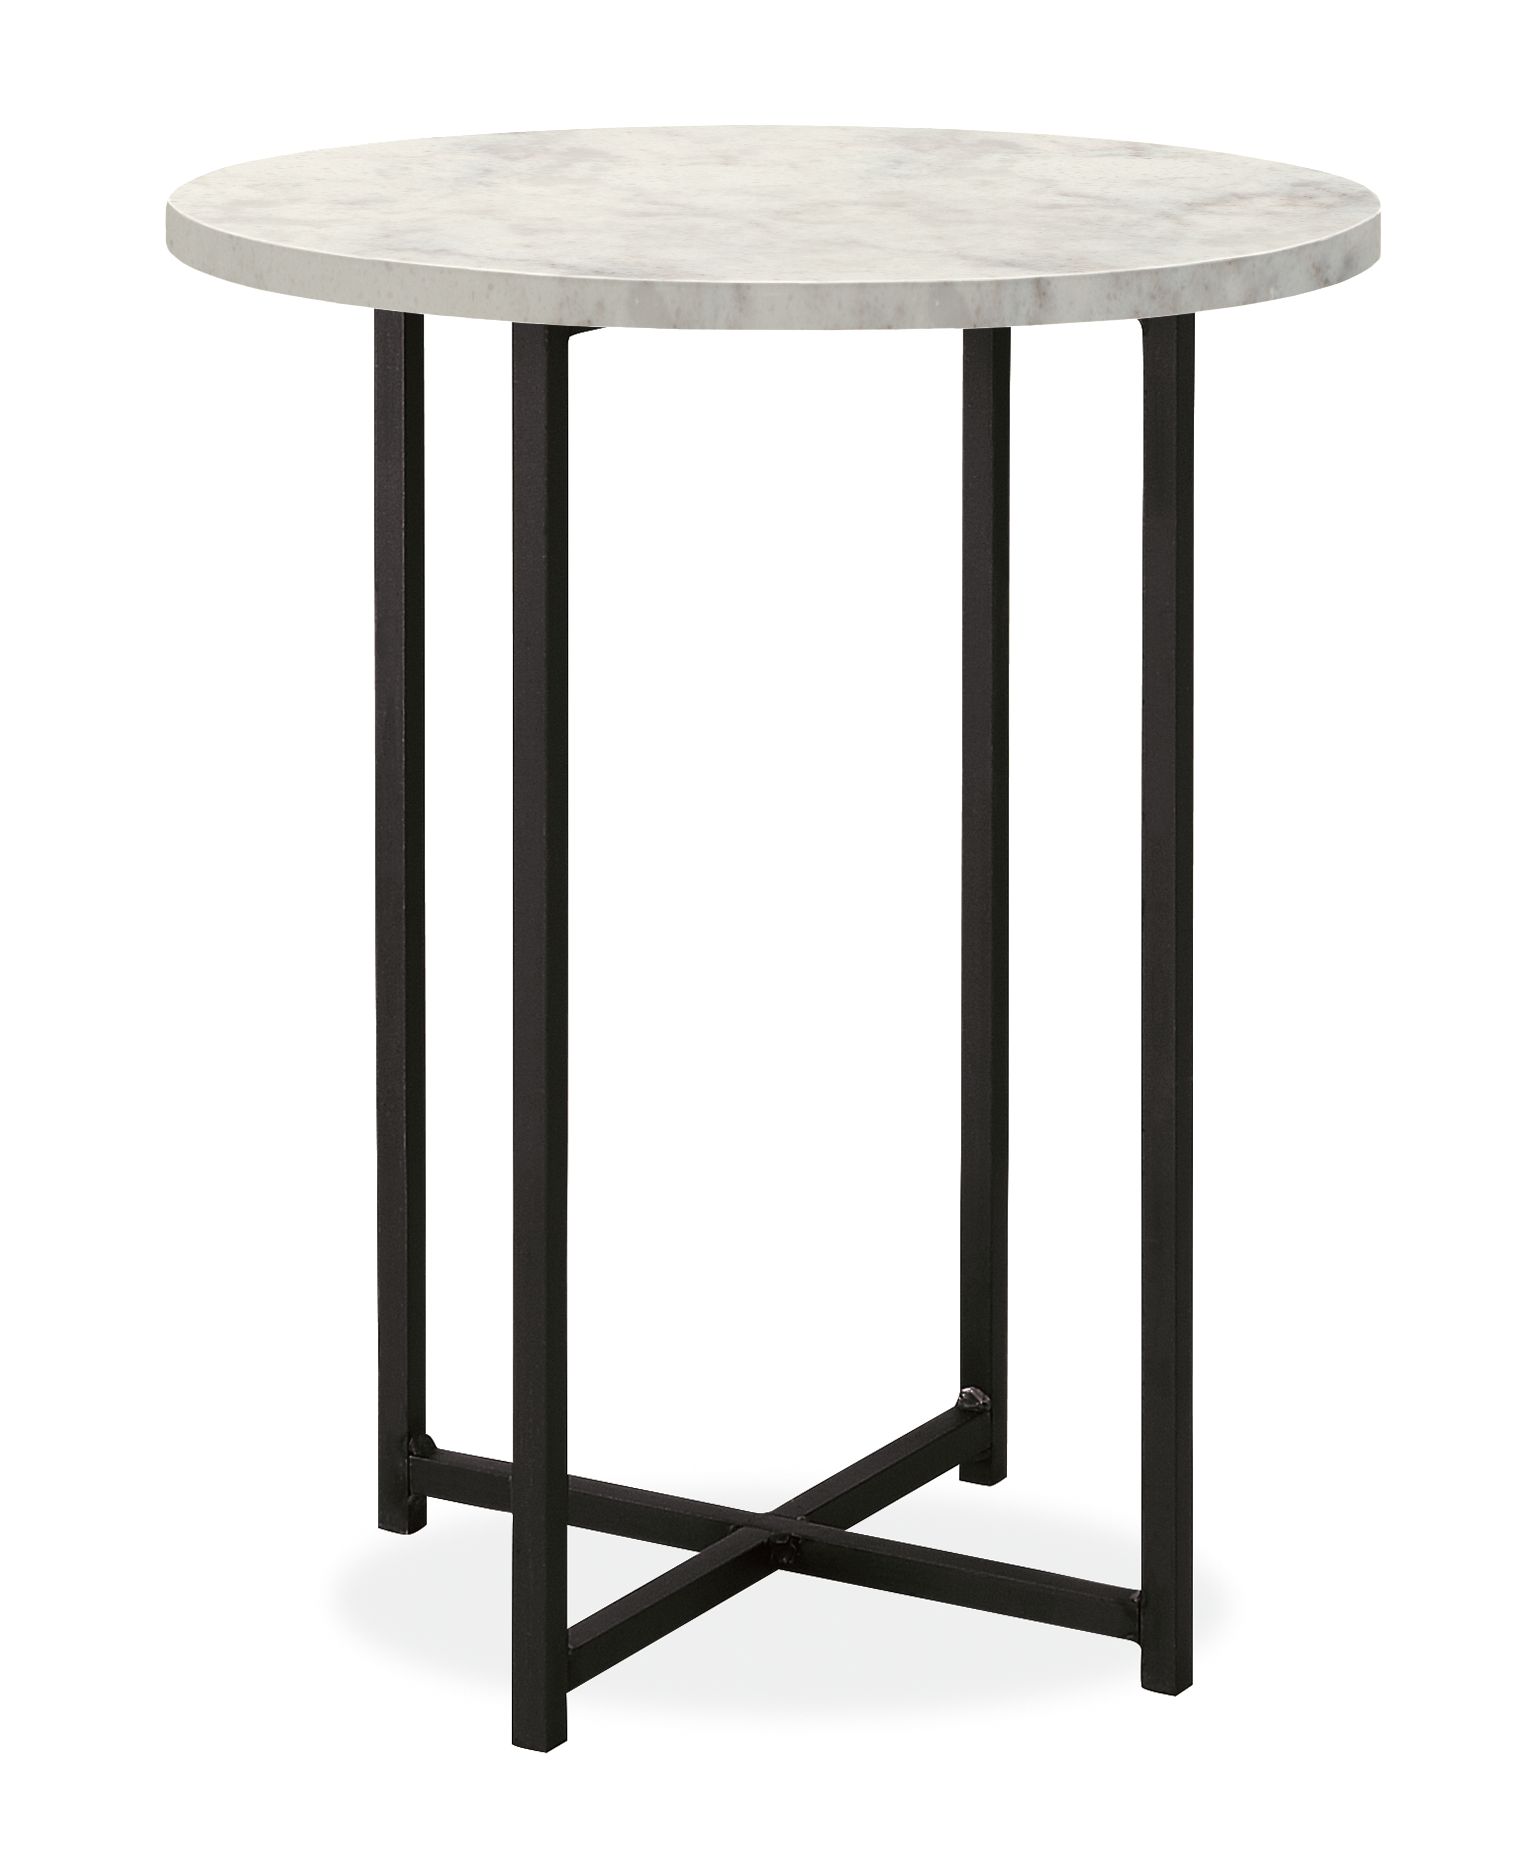 Classic End Tables In Natural Steel, White Round Side Table Black Legs Wood Top